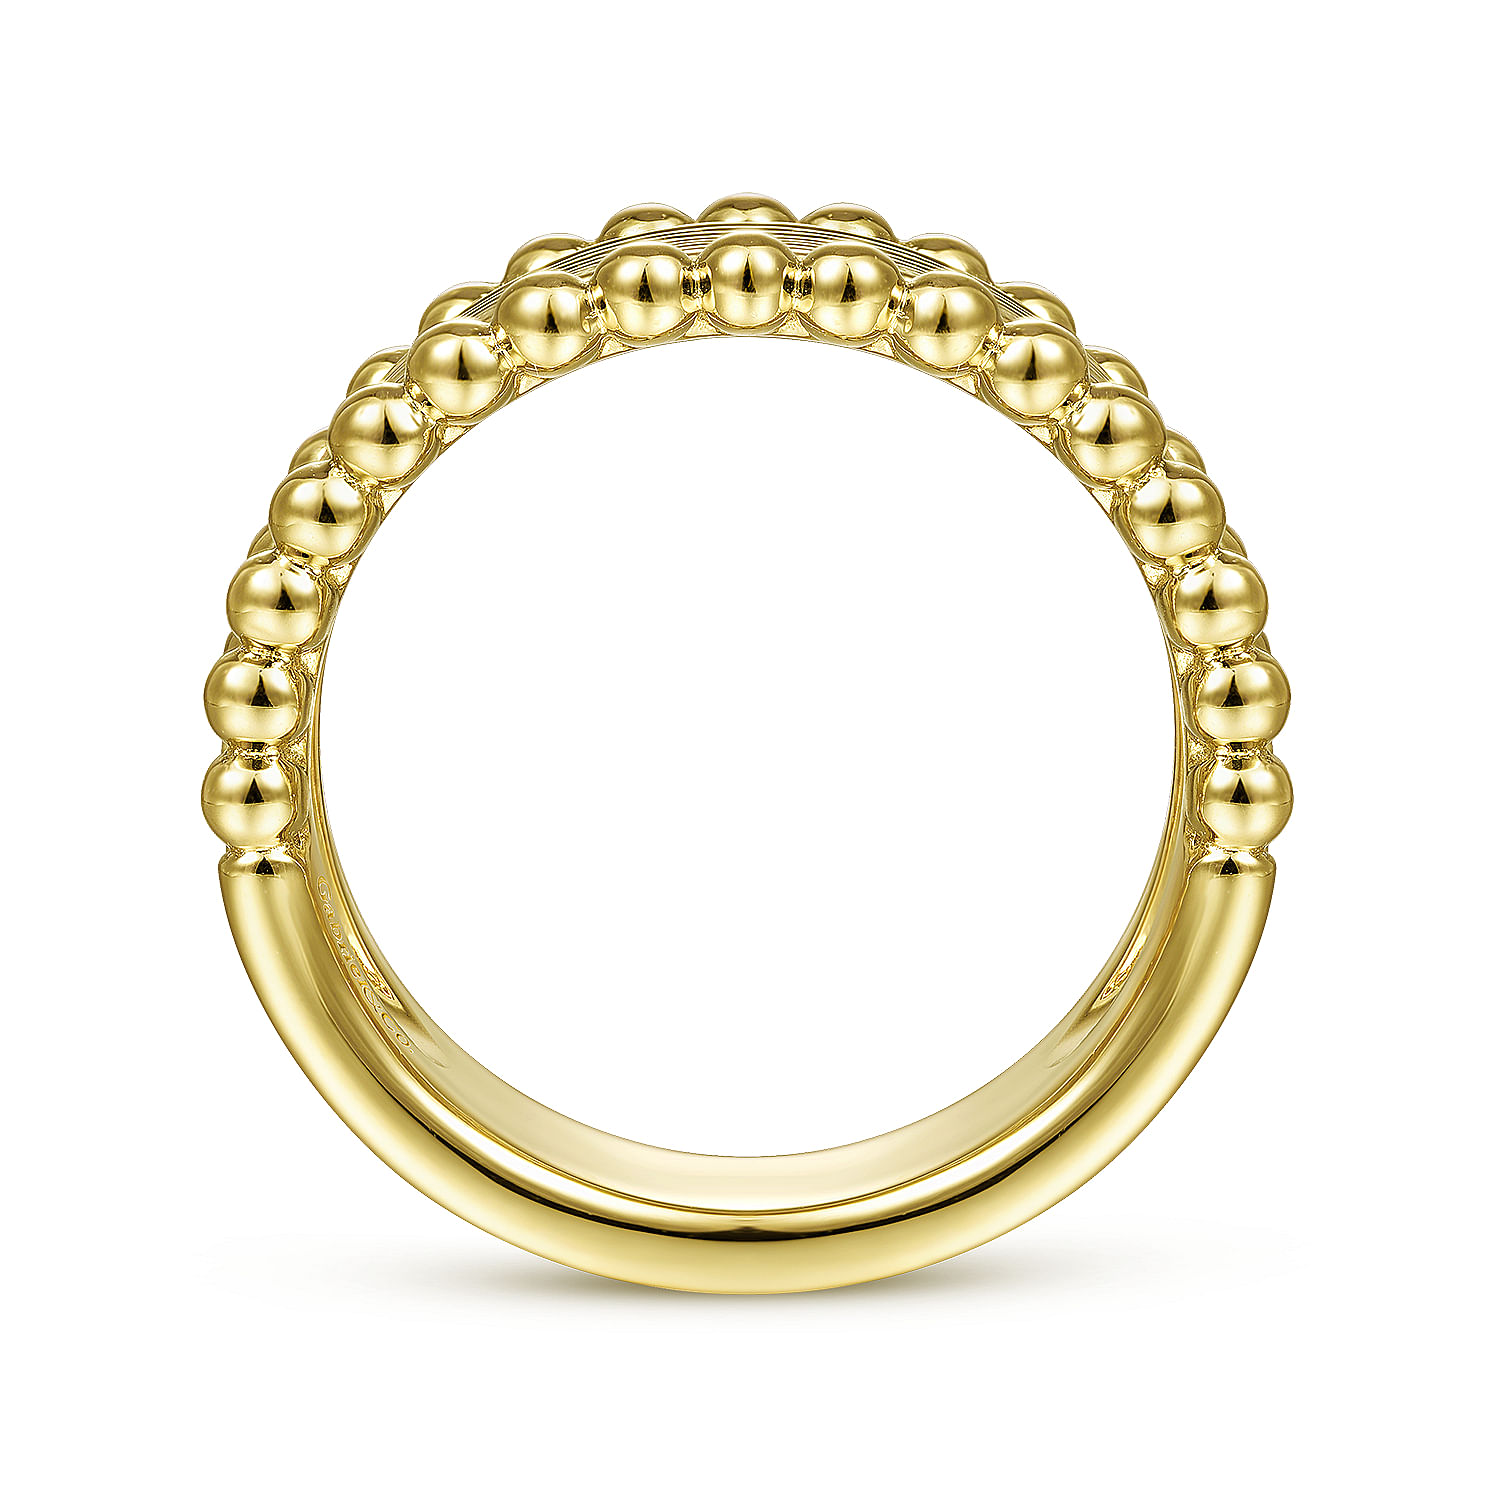 14K Yellow Gold Wide Band Ring with Bujukan Bead Frame